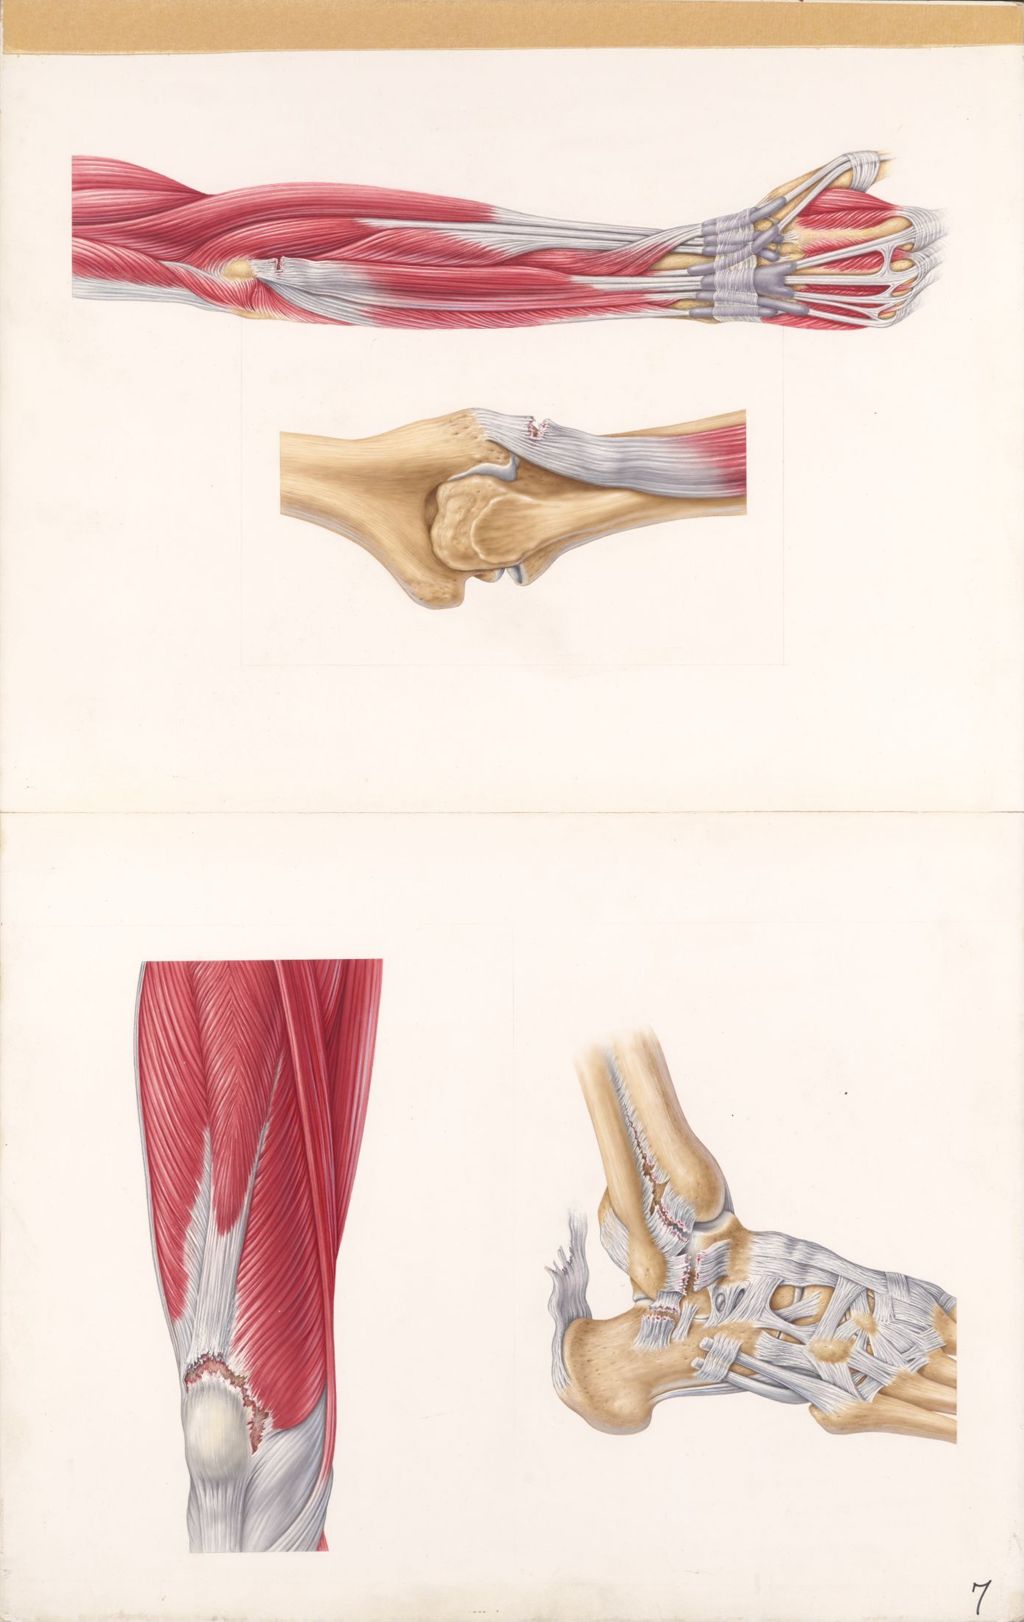 Miniature of Medical Profiles, Decadron Phosphate with Xylocaine, Sites and appearances of some musculoskeletal disorders, Plate II